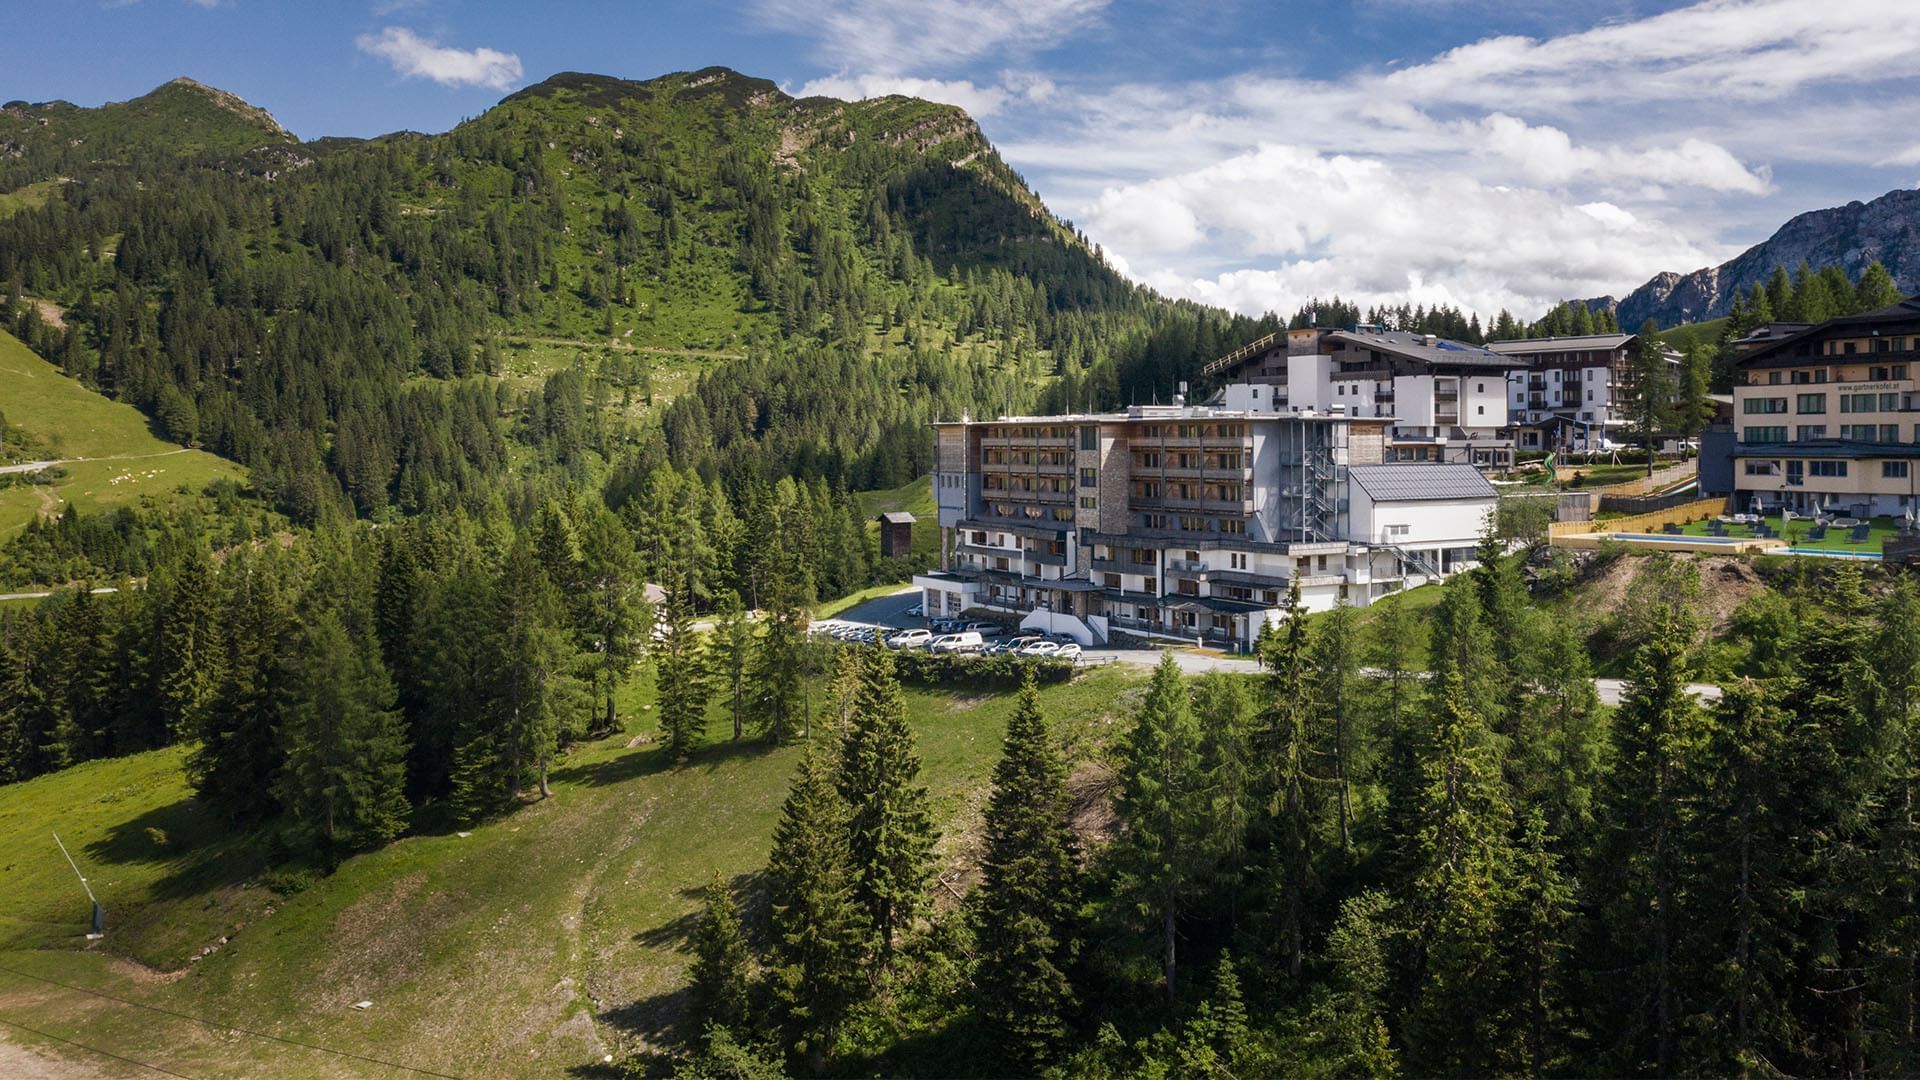 An exterior view of the hotel at Falkensteiner Hotel Sonnenalpe